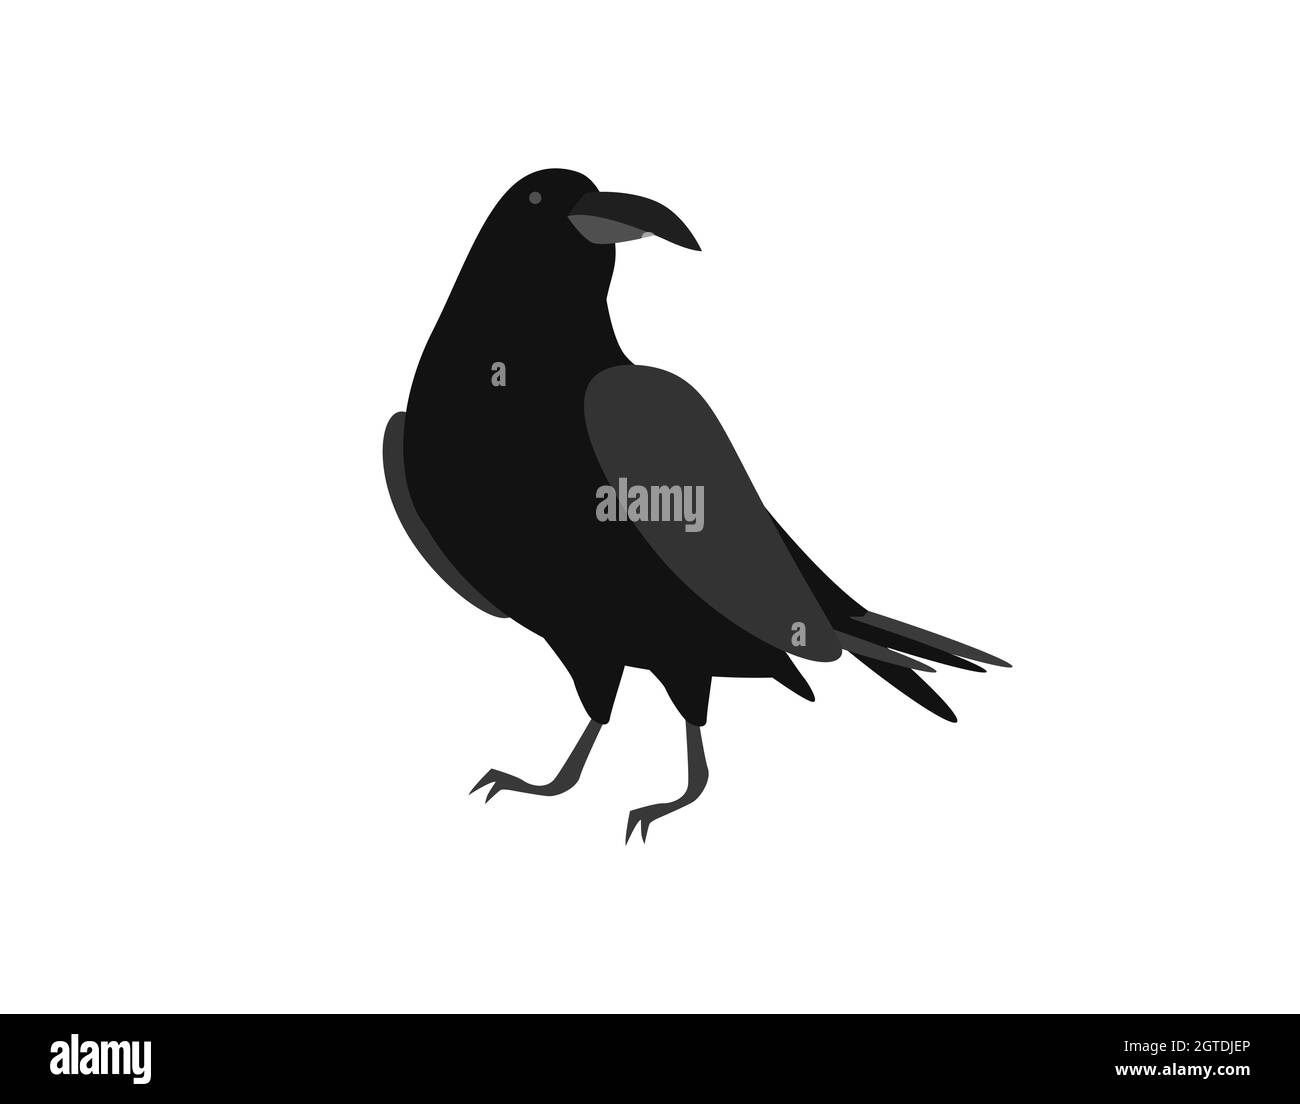 Black raven. Brooding bird sits on surface with its head turned Stock Vector